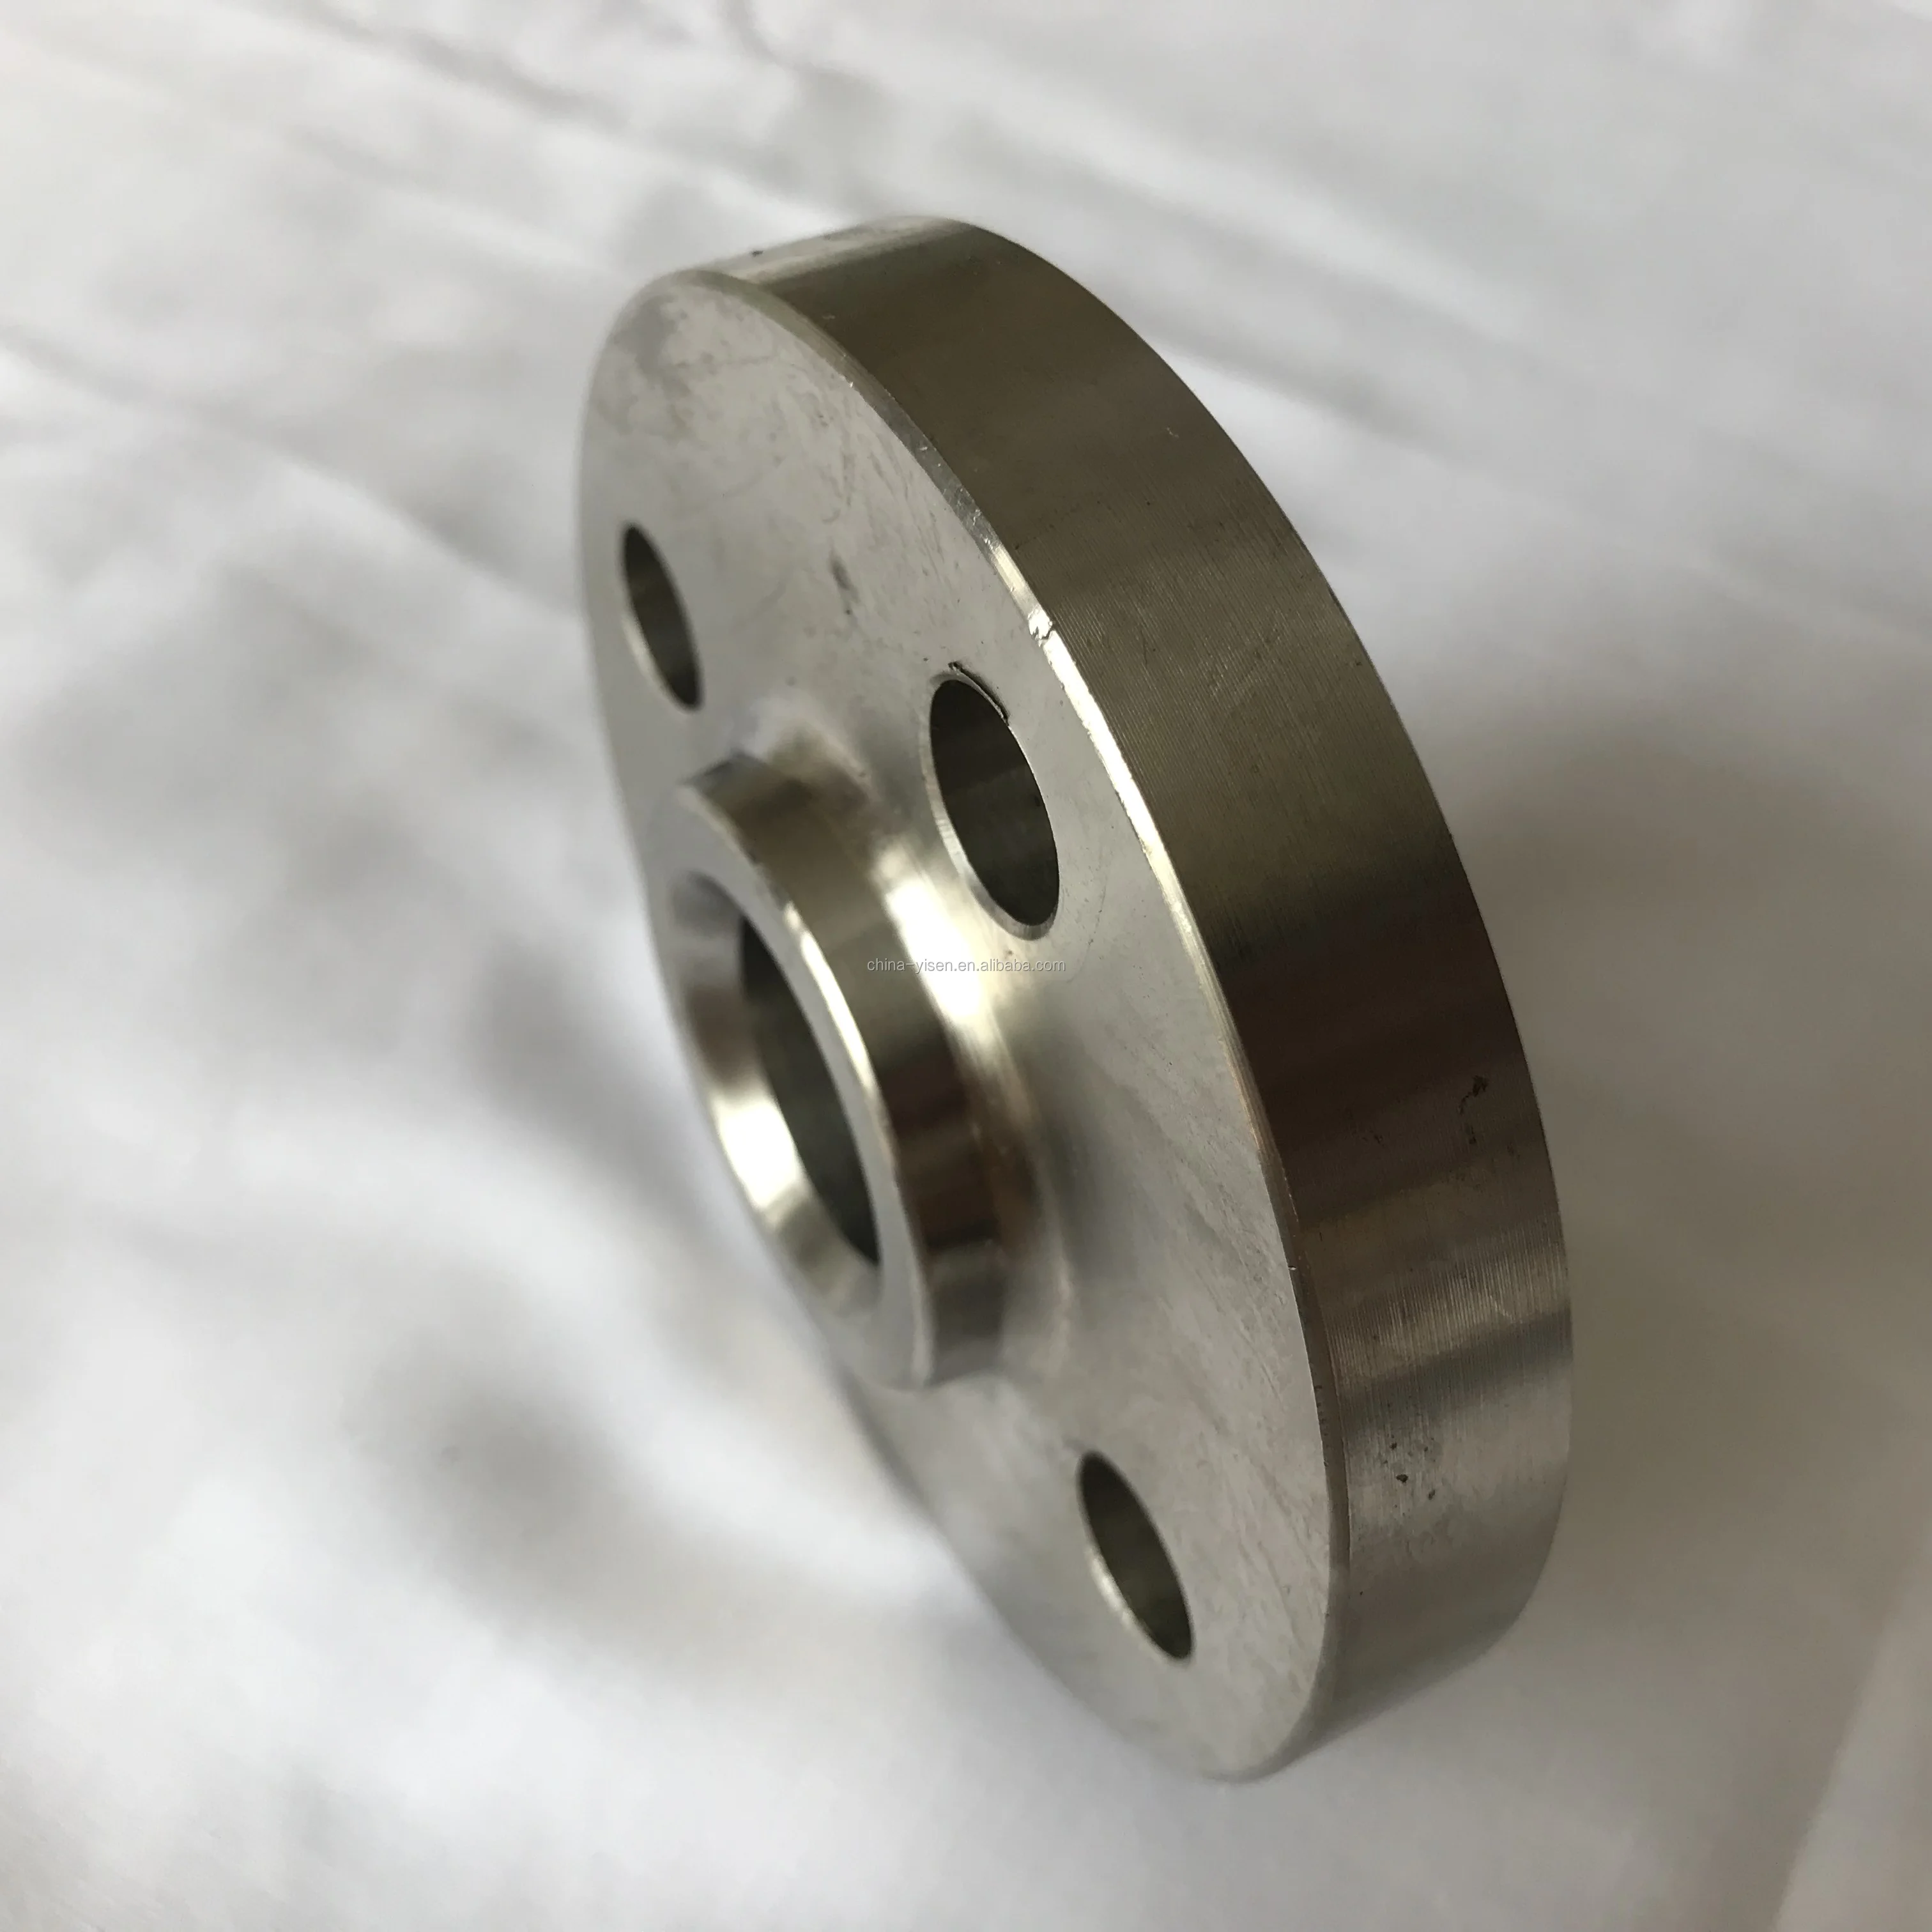 Ansi B165 Cl600 Forged Flanges Stainless Steel Aisi 316316l Slip On Flanges Buy Stainless 0261